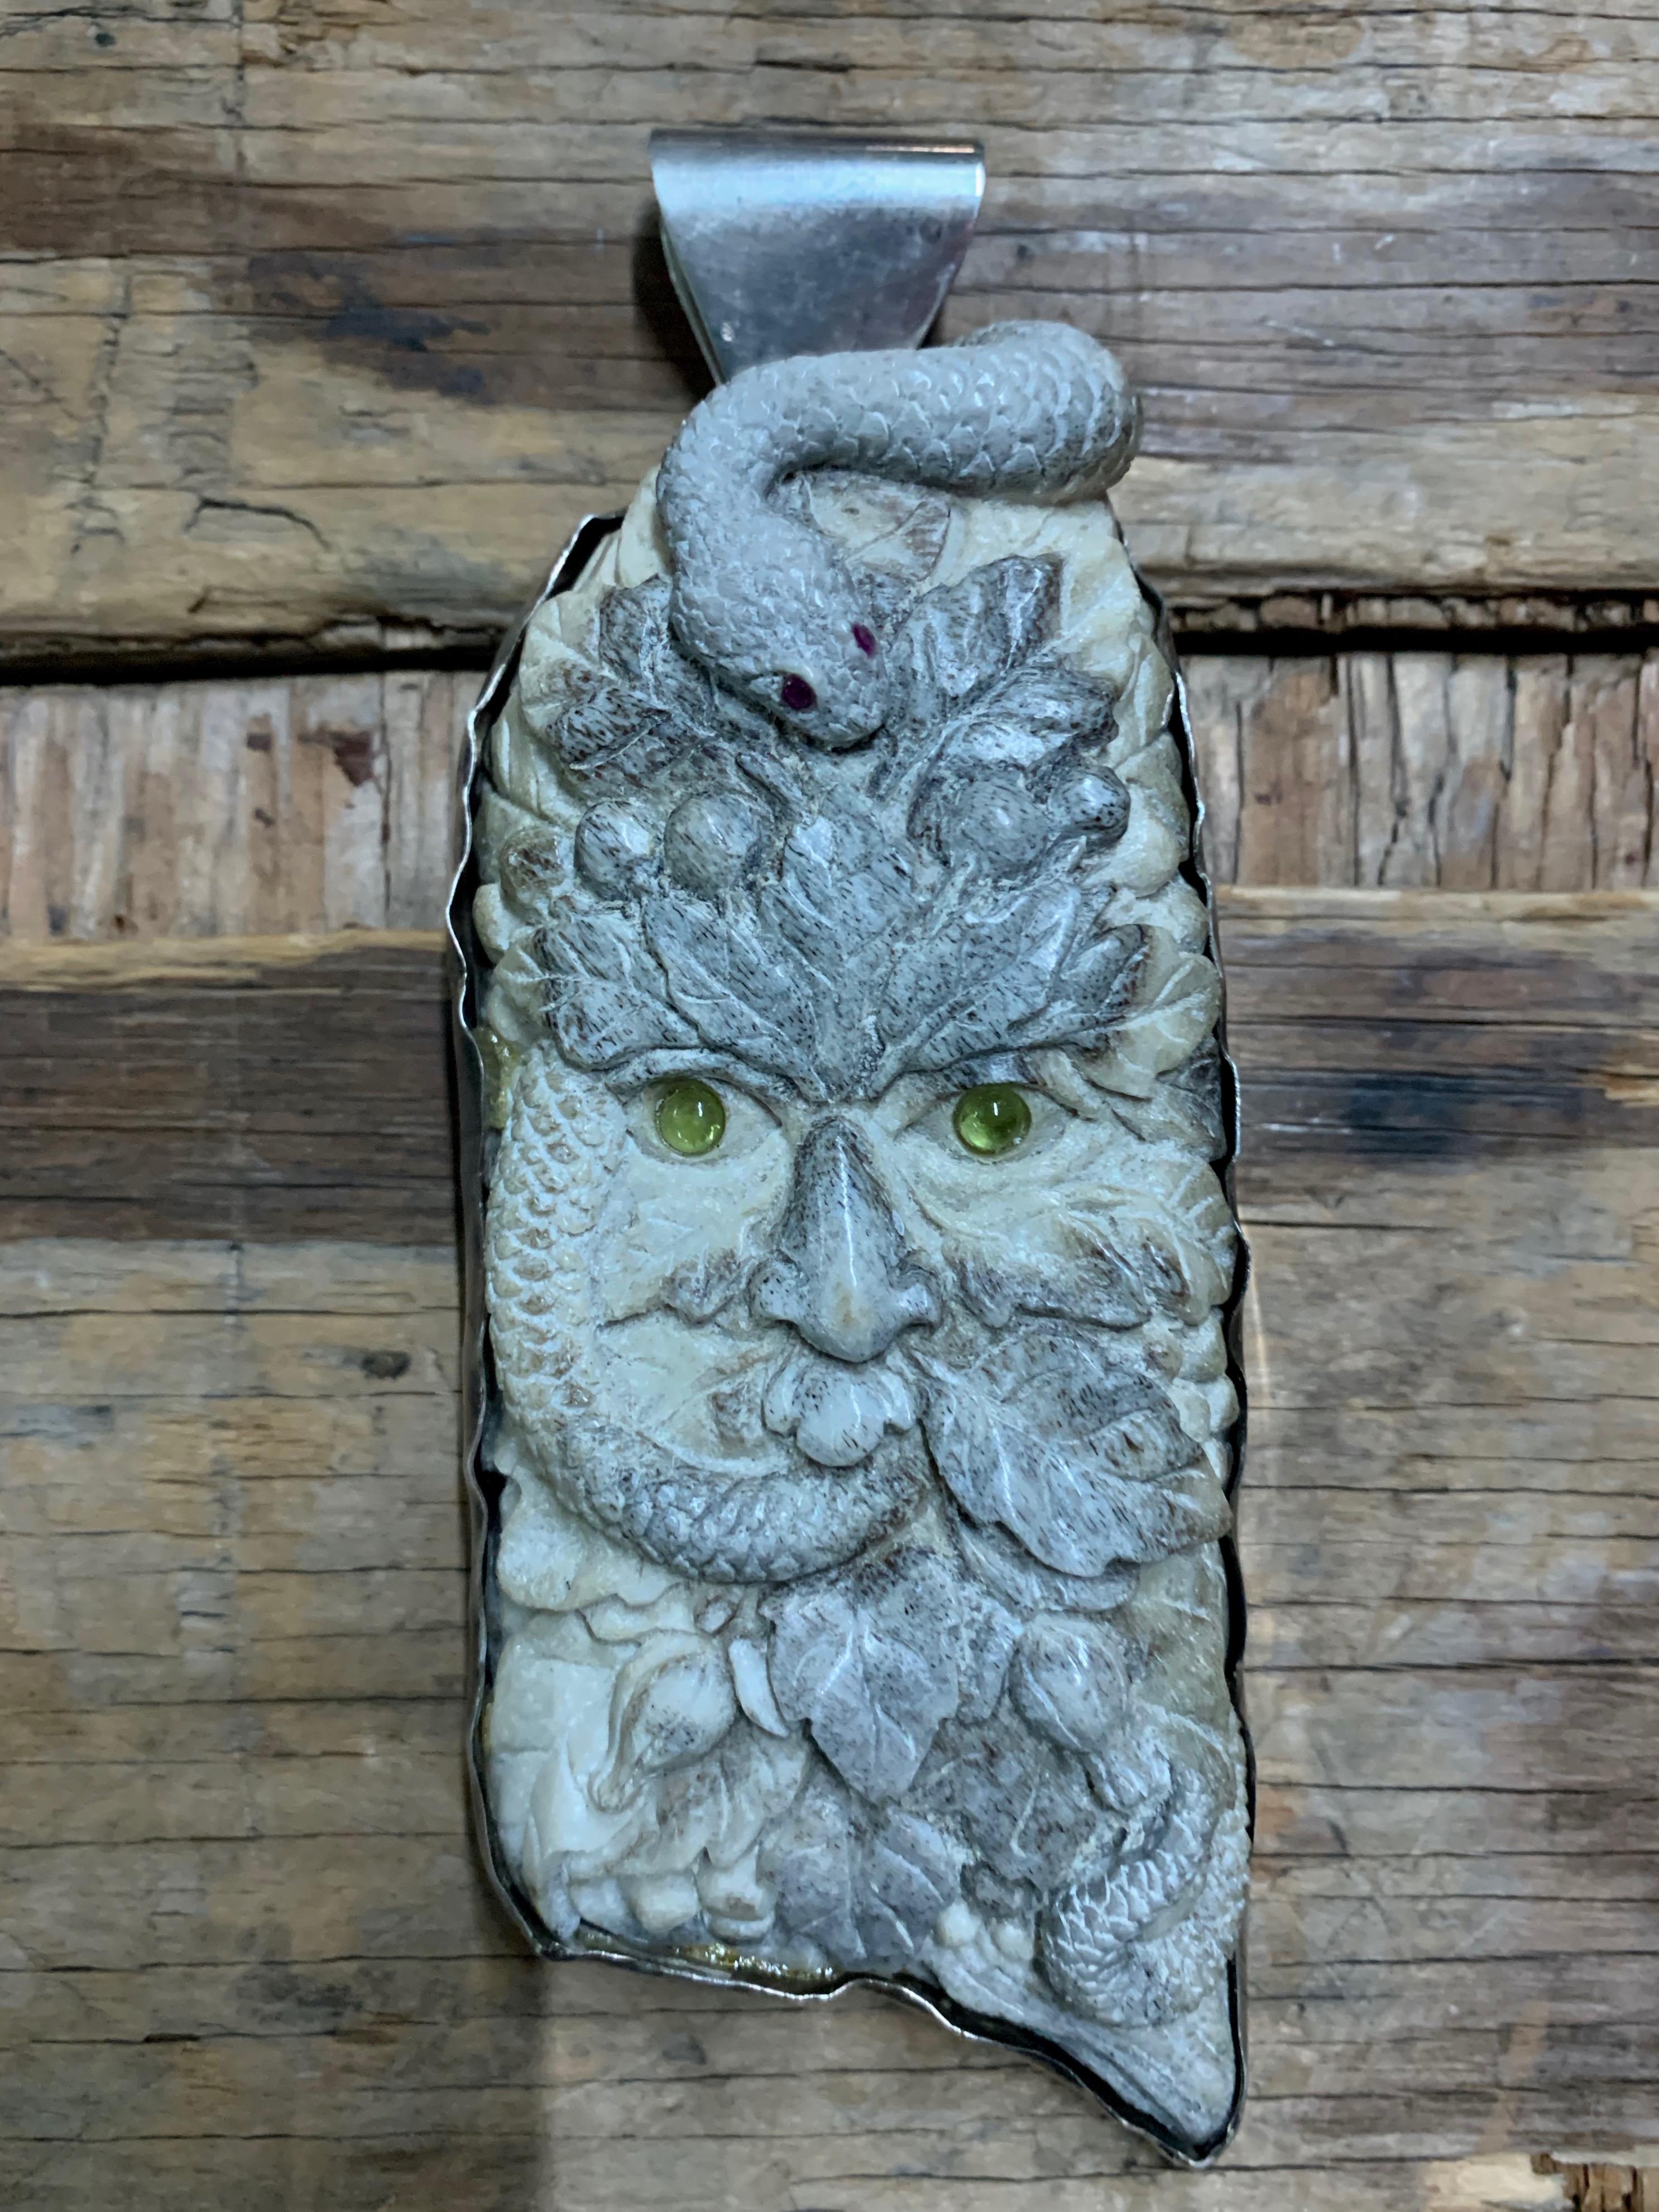 Intricate carving of a green-eyed man entwined with a snake. The snake eyes are rubies. The back of the piece feature carvings of leaves, representational of the fall harvest. 

The Green man is believed to symbolize the cycle of life, death and